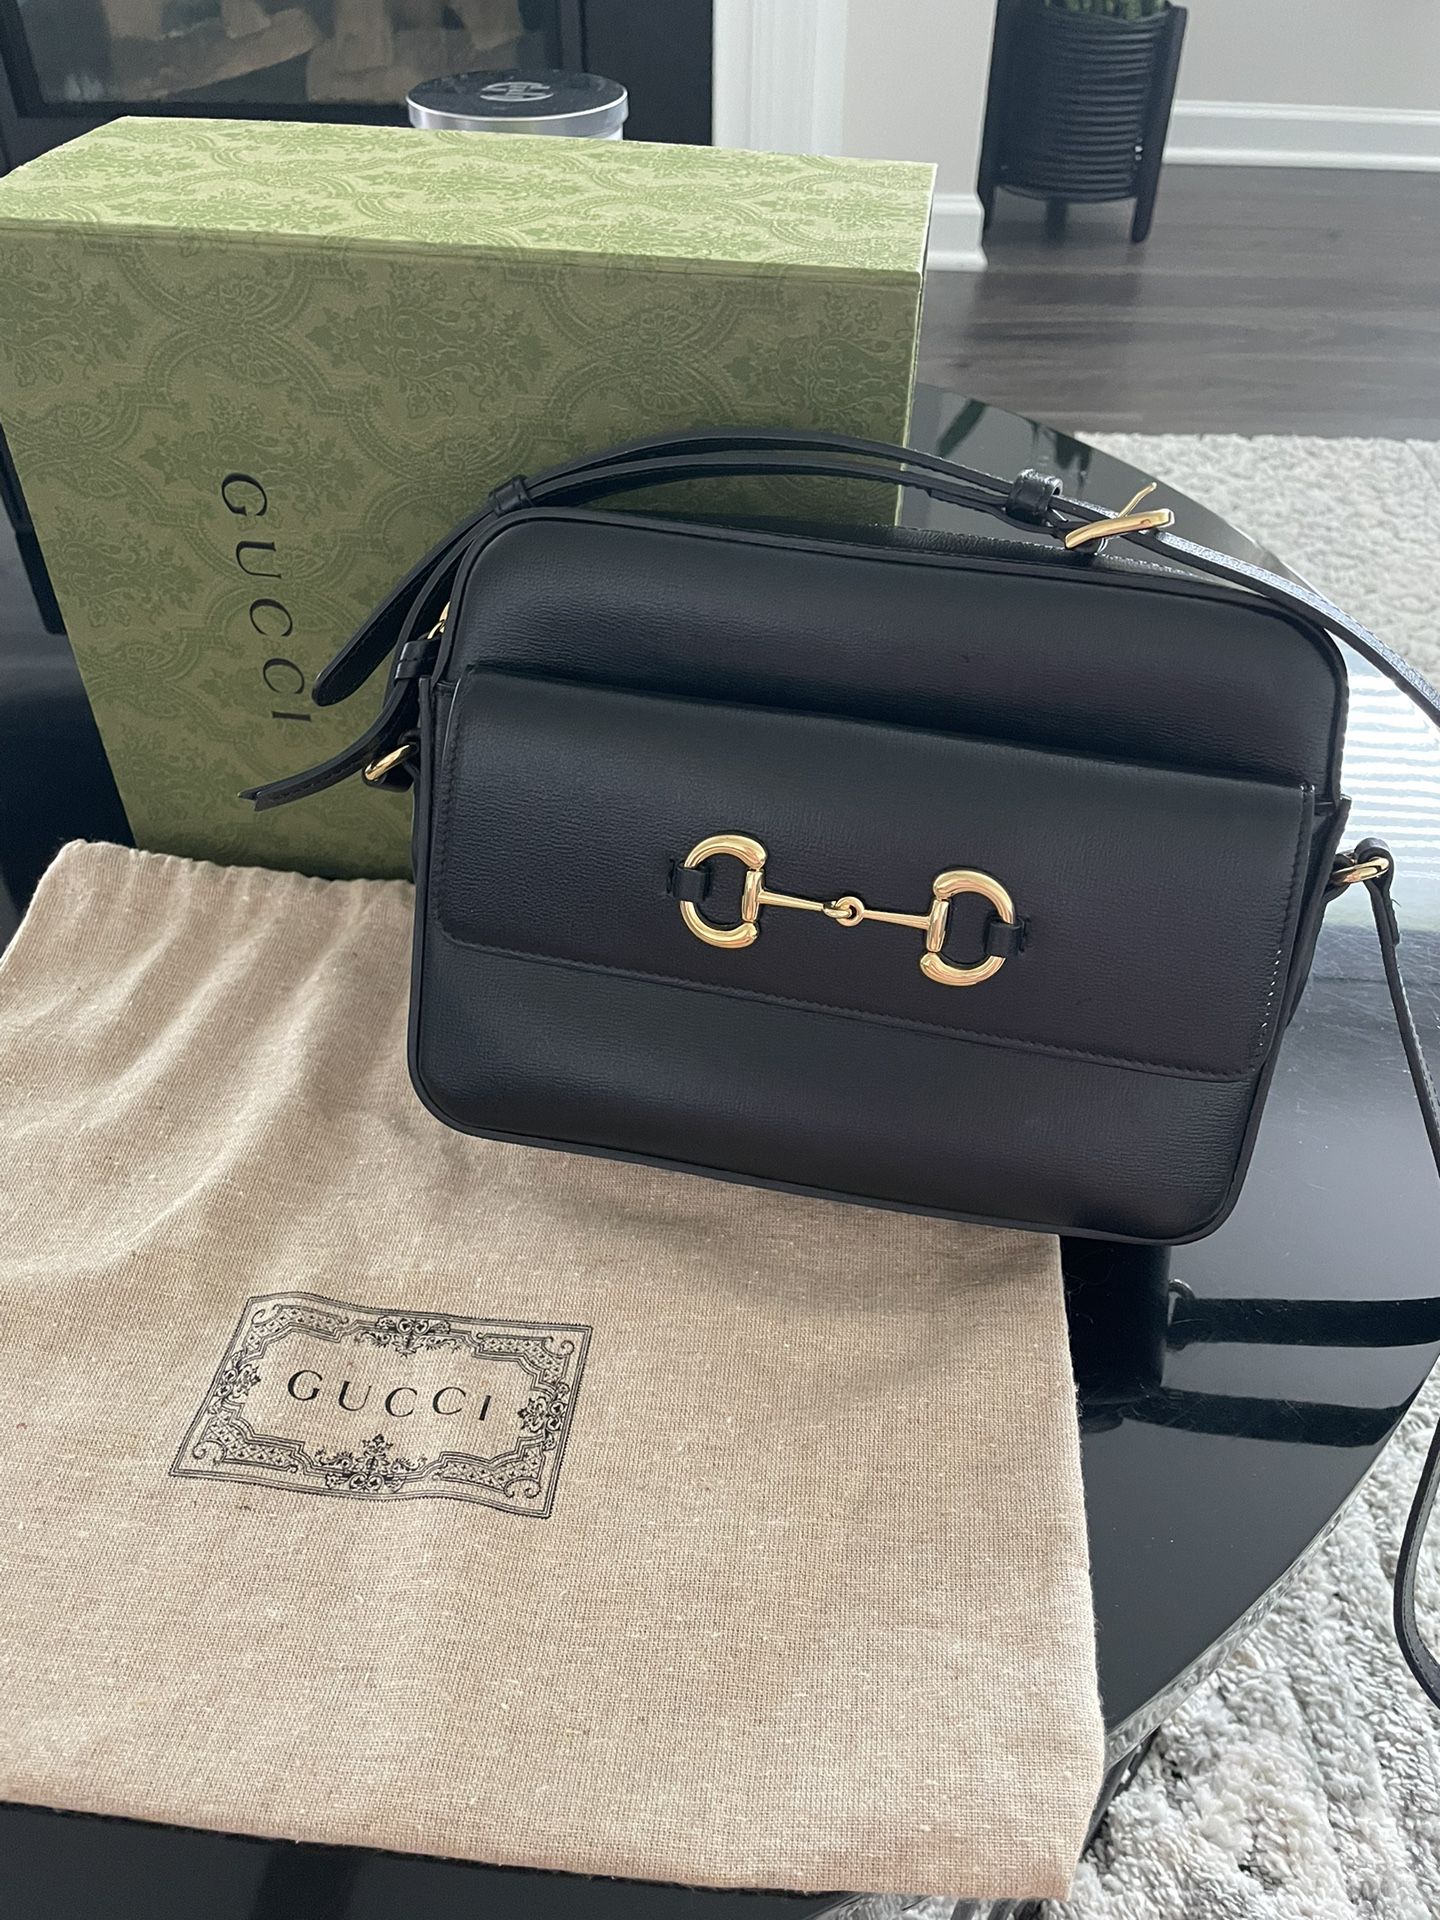 Gucci, Bags, Authentic Gucci Bag Very Lightly Used